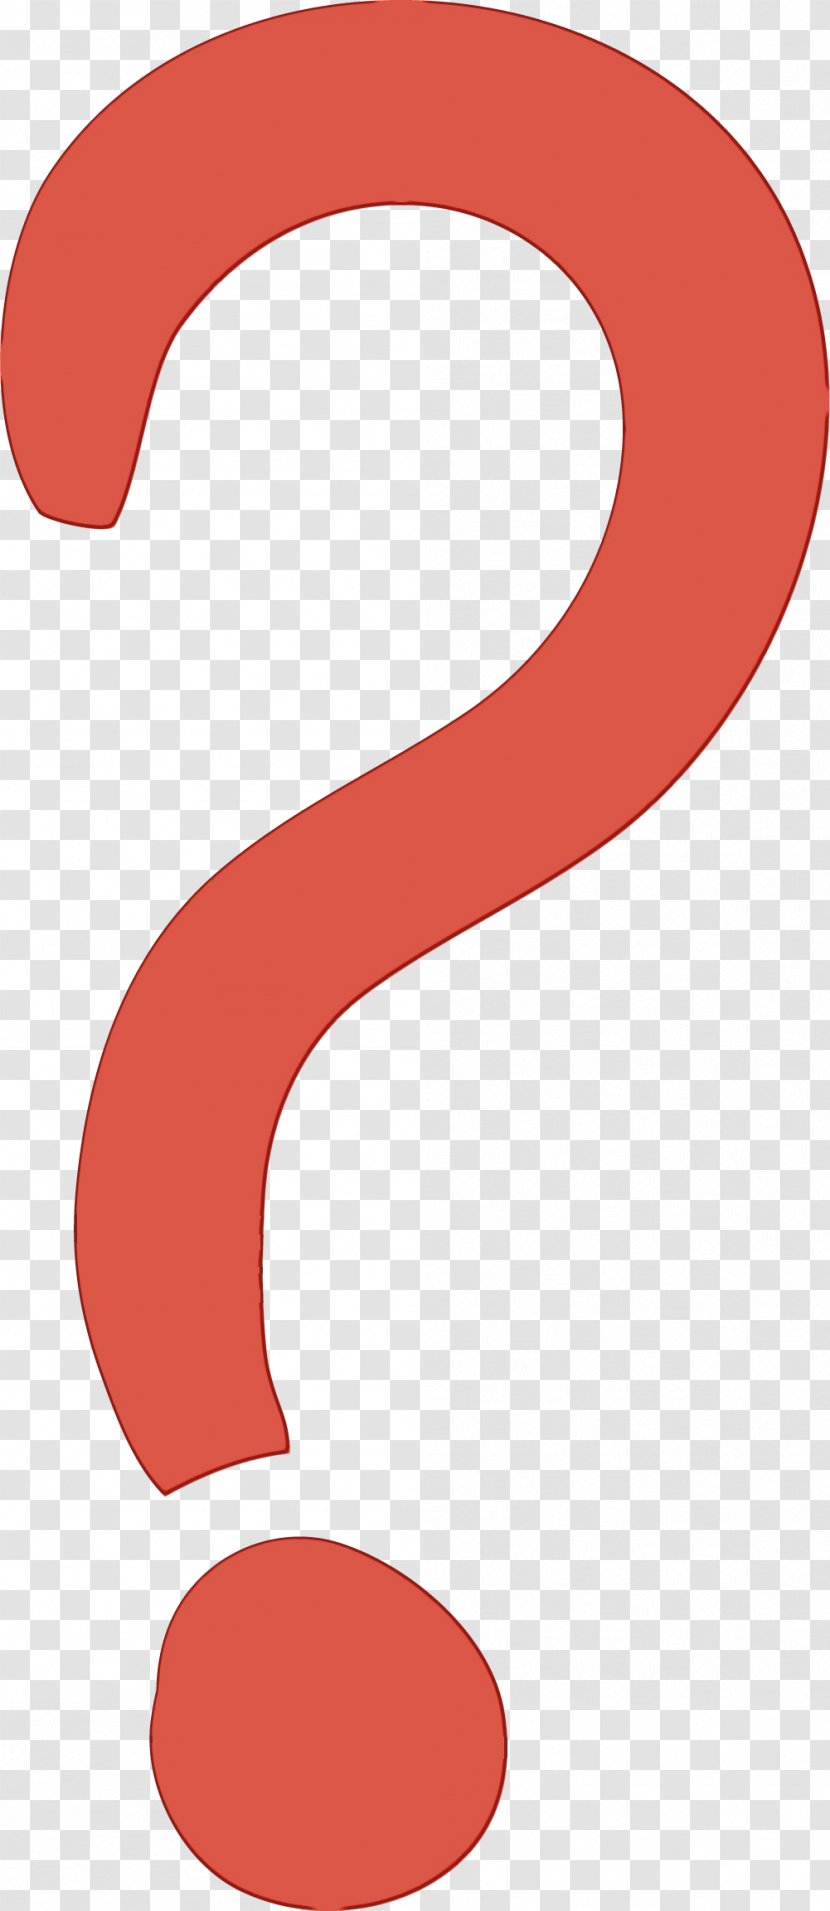 Clip Art Question Mark Exclamation Image - Red Transparent PNG